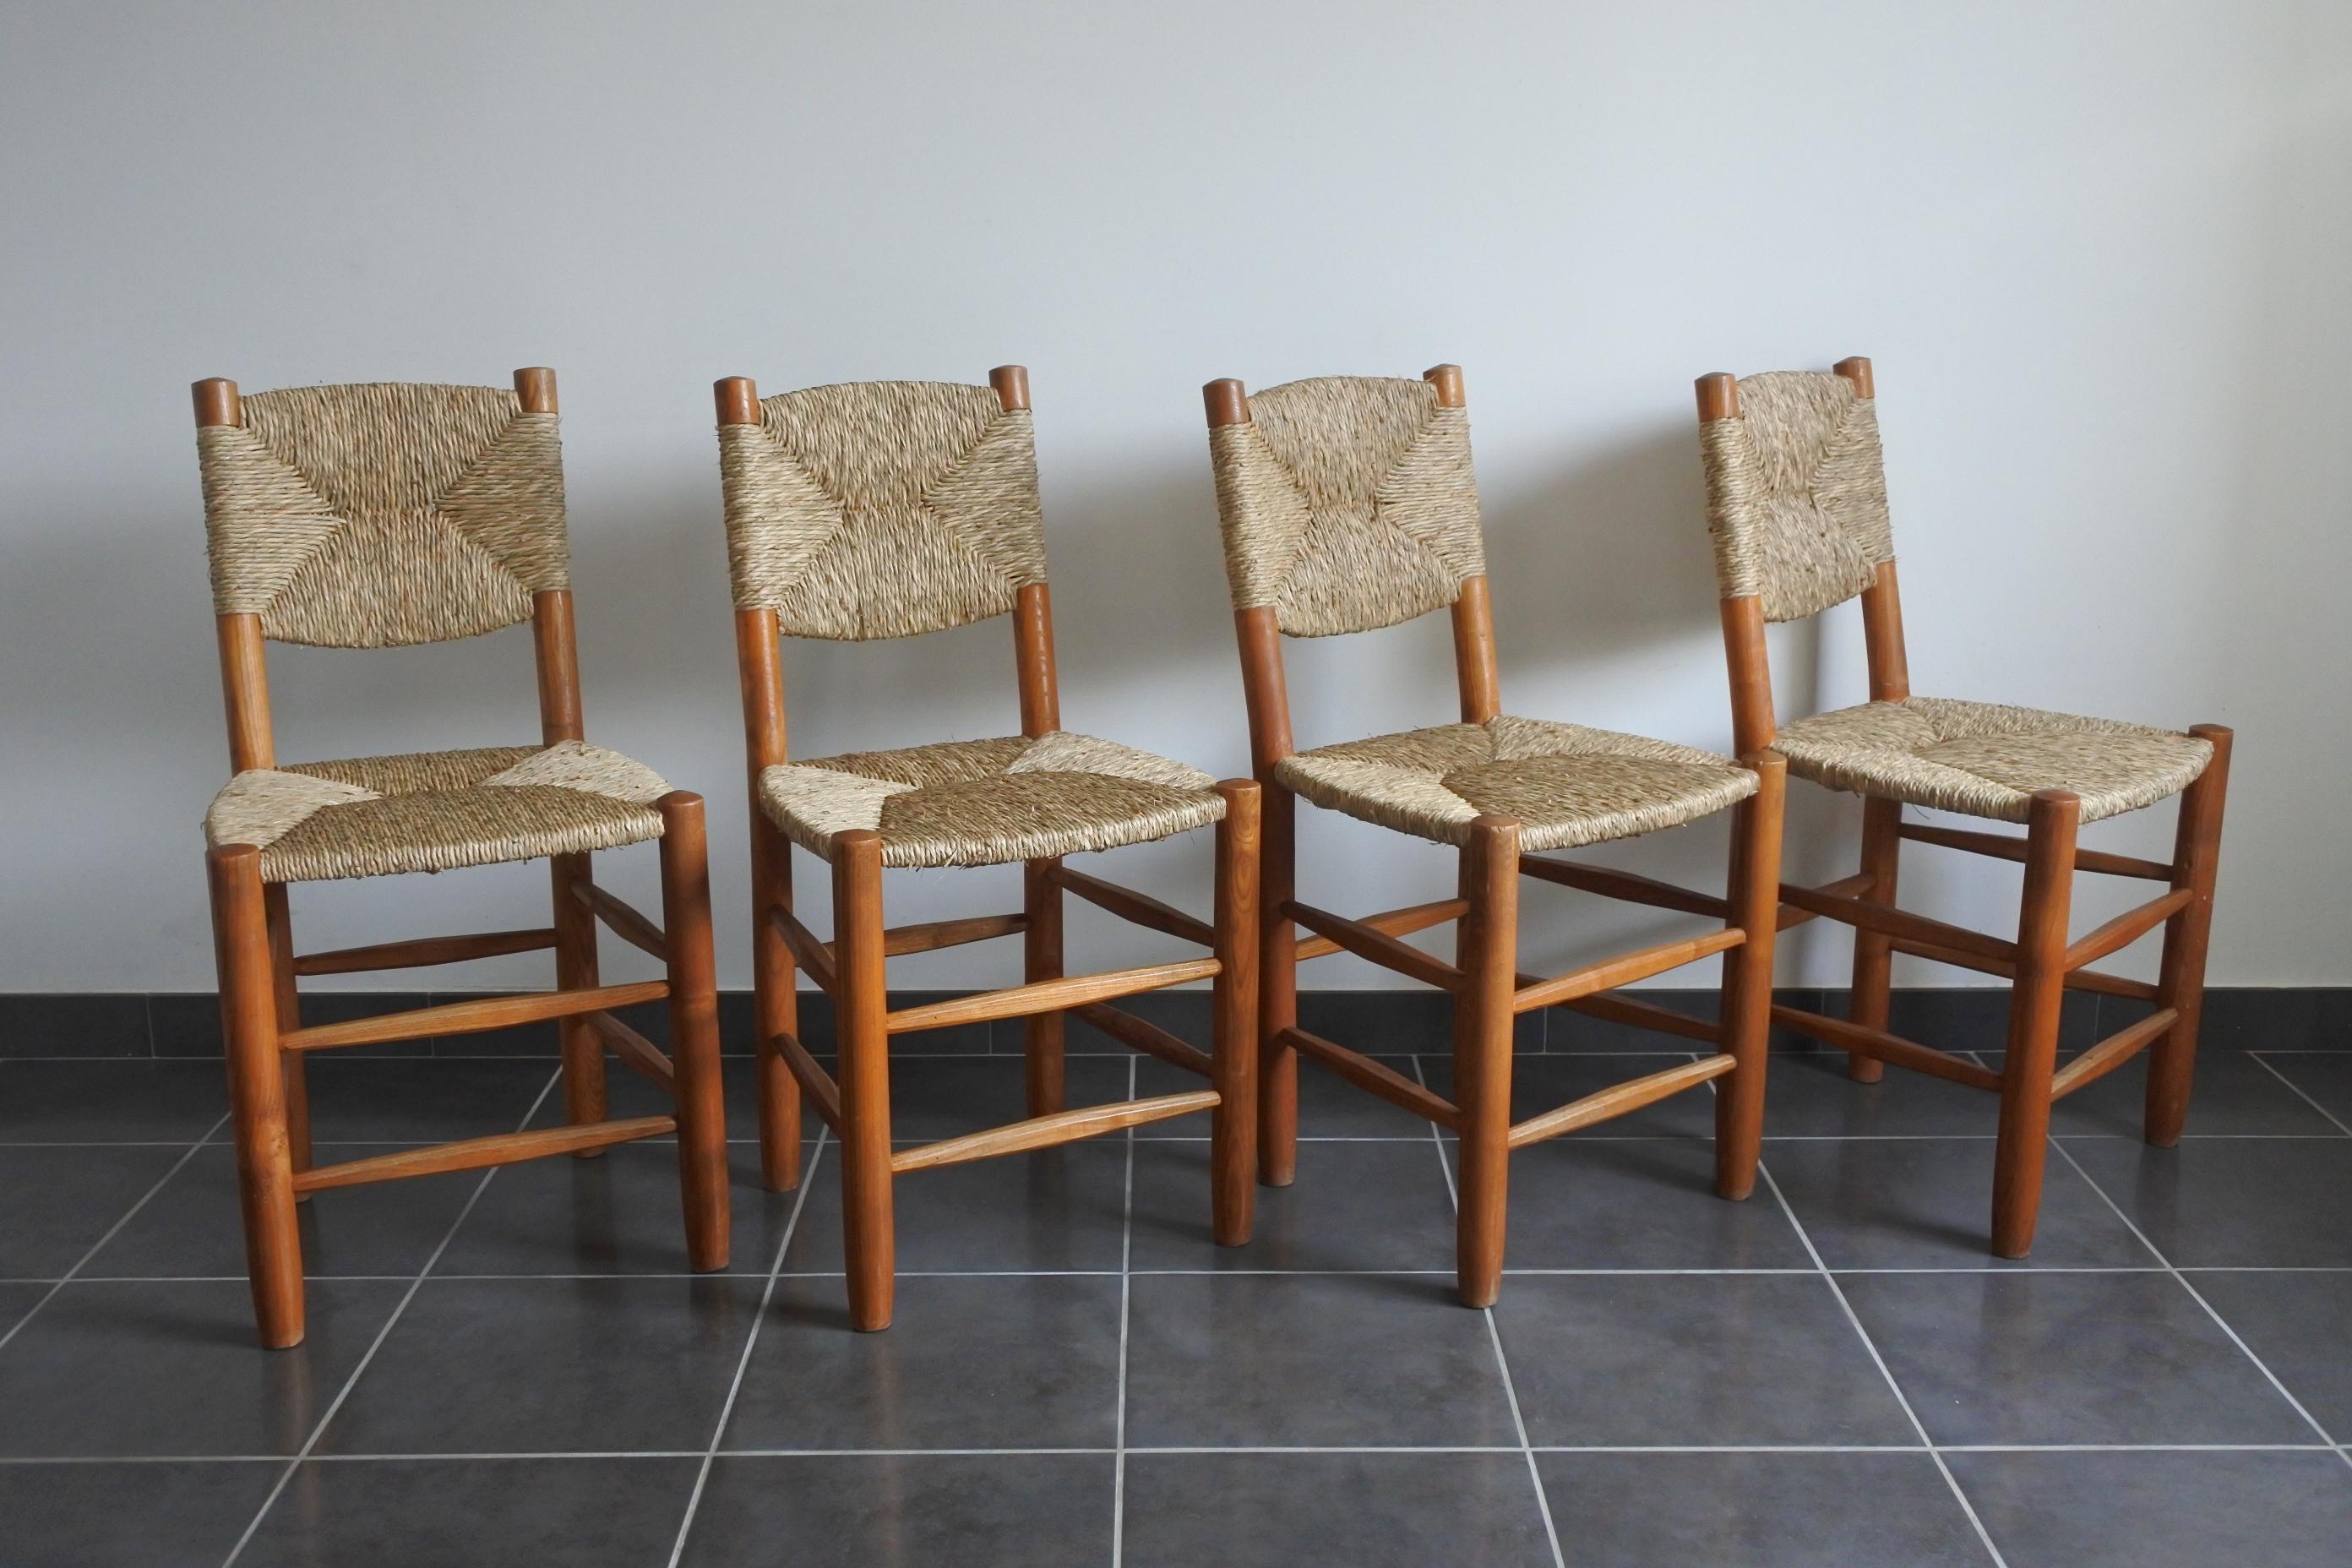 Set of 4 Bauche chairs by Charlotte Perriand.
Solid ash wood and straw.
Model number 19 with tilted back.
Edited by Steph Simon in the 1950s.
Literature: 